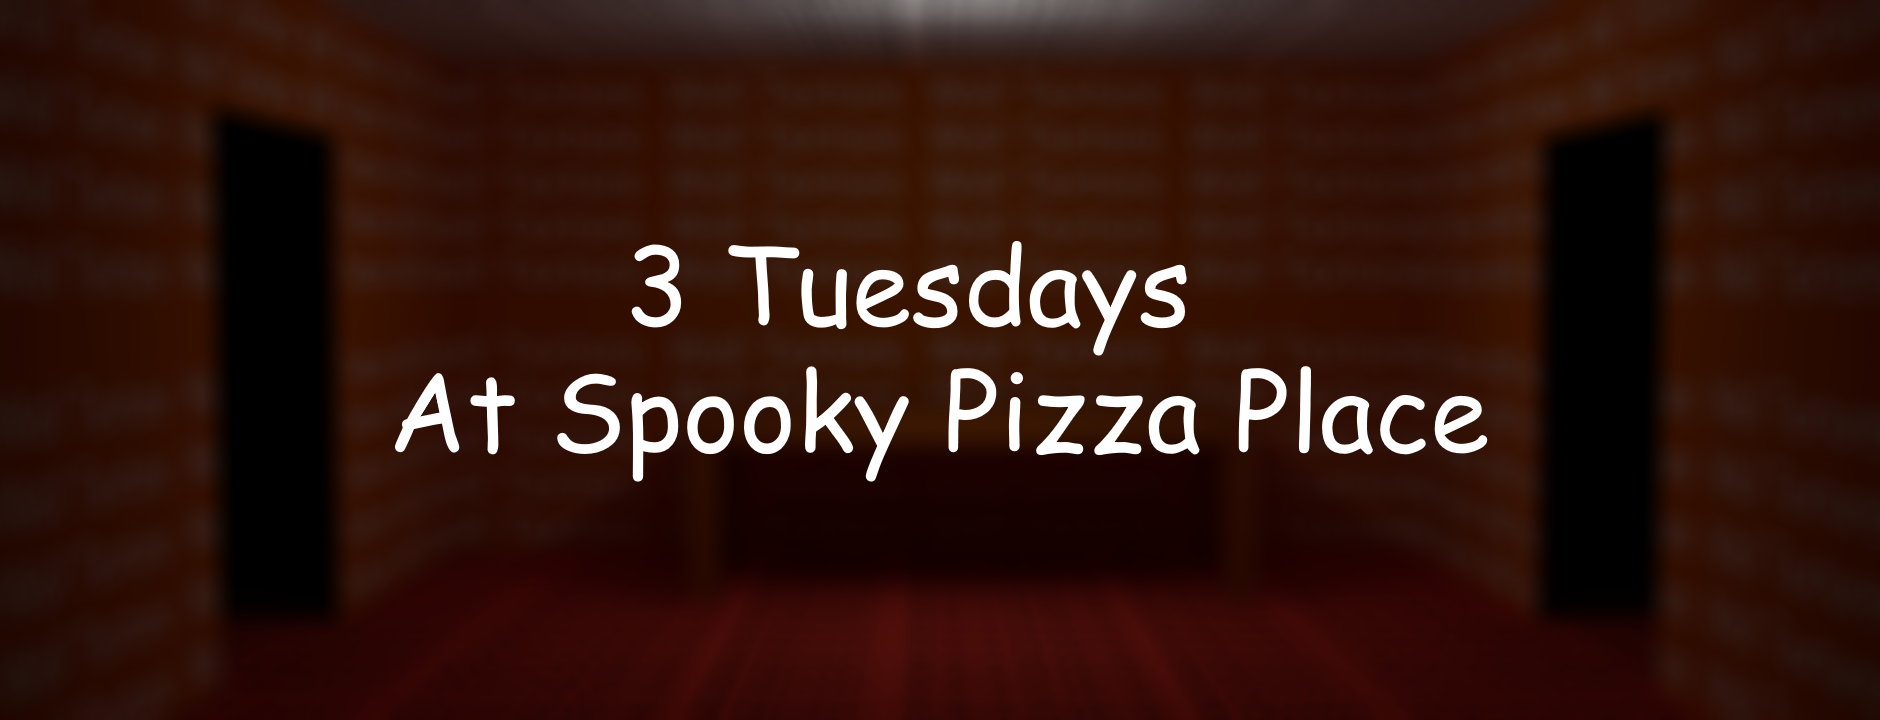 3 Tuesdays at Spooky Pizza Place